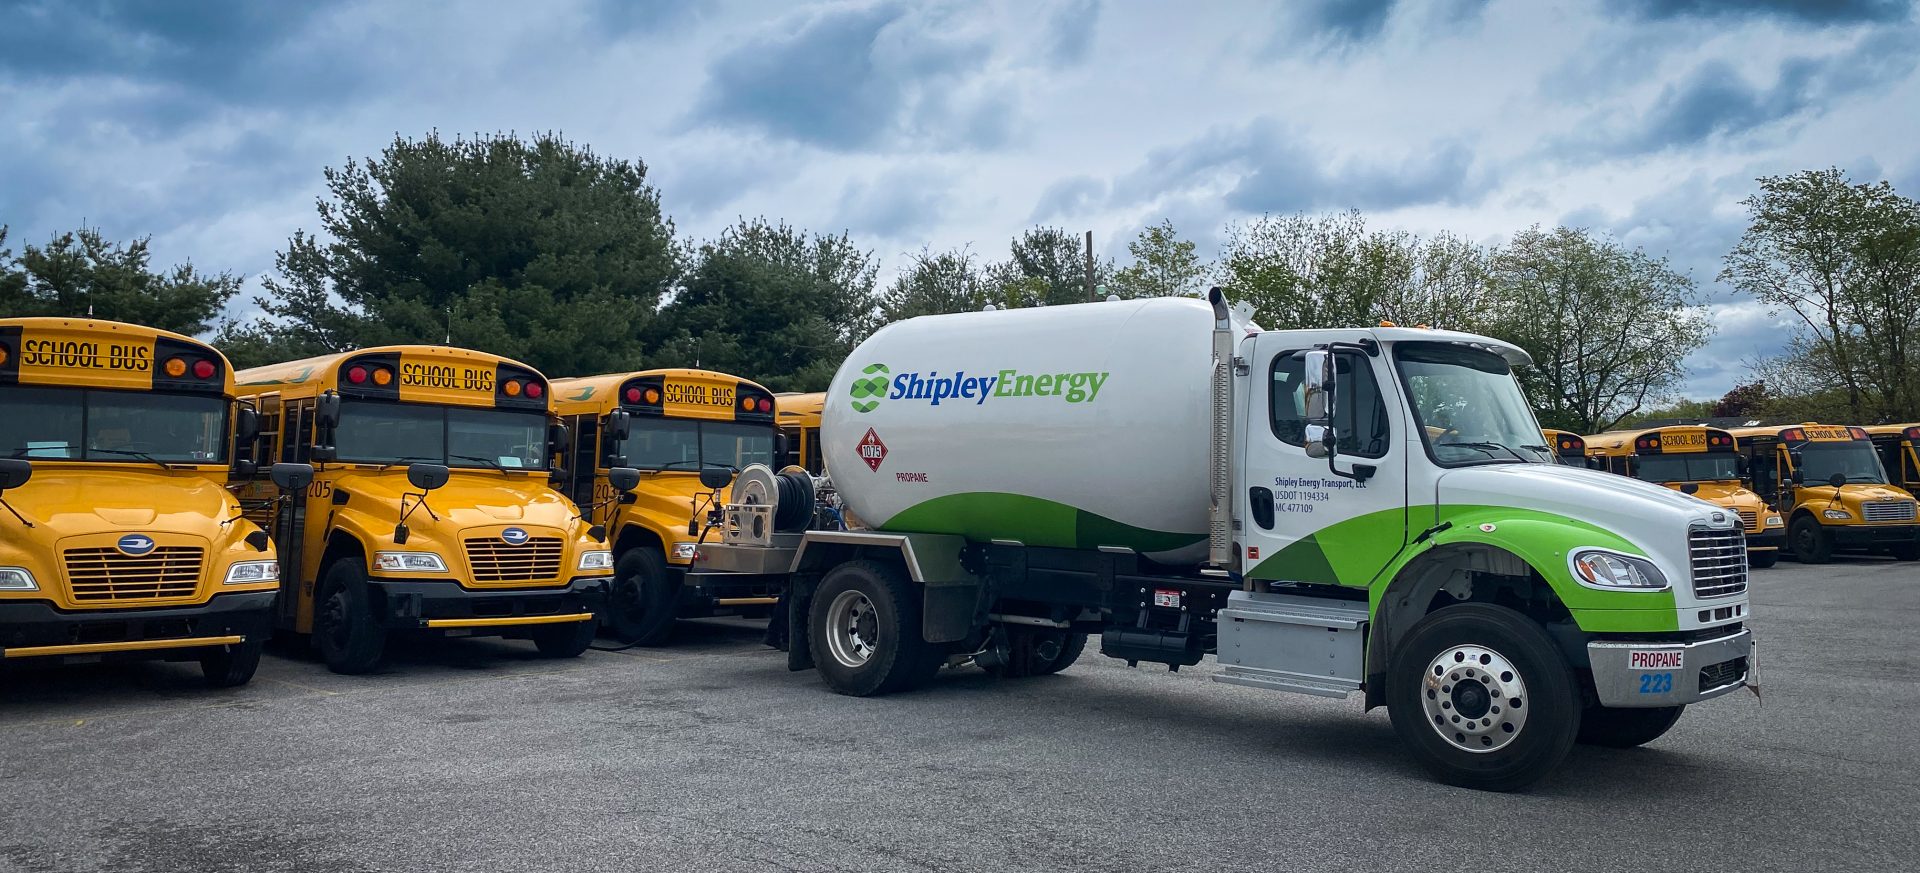 Propane busses and shipley energy truck